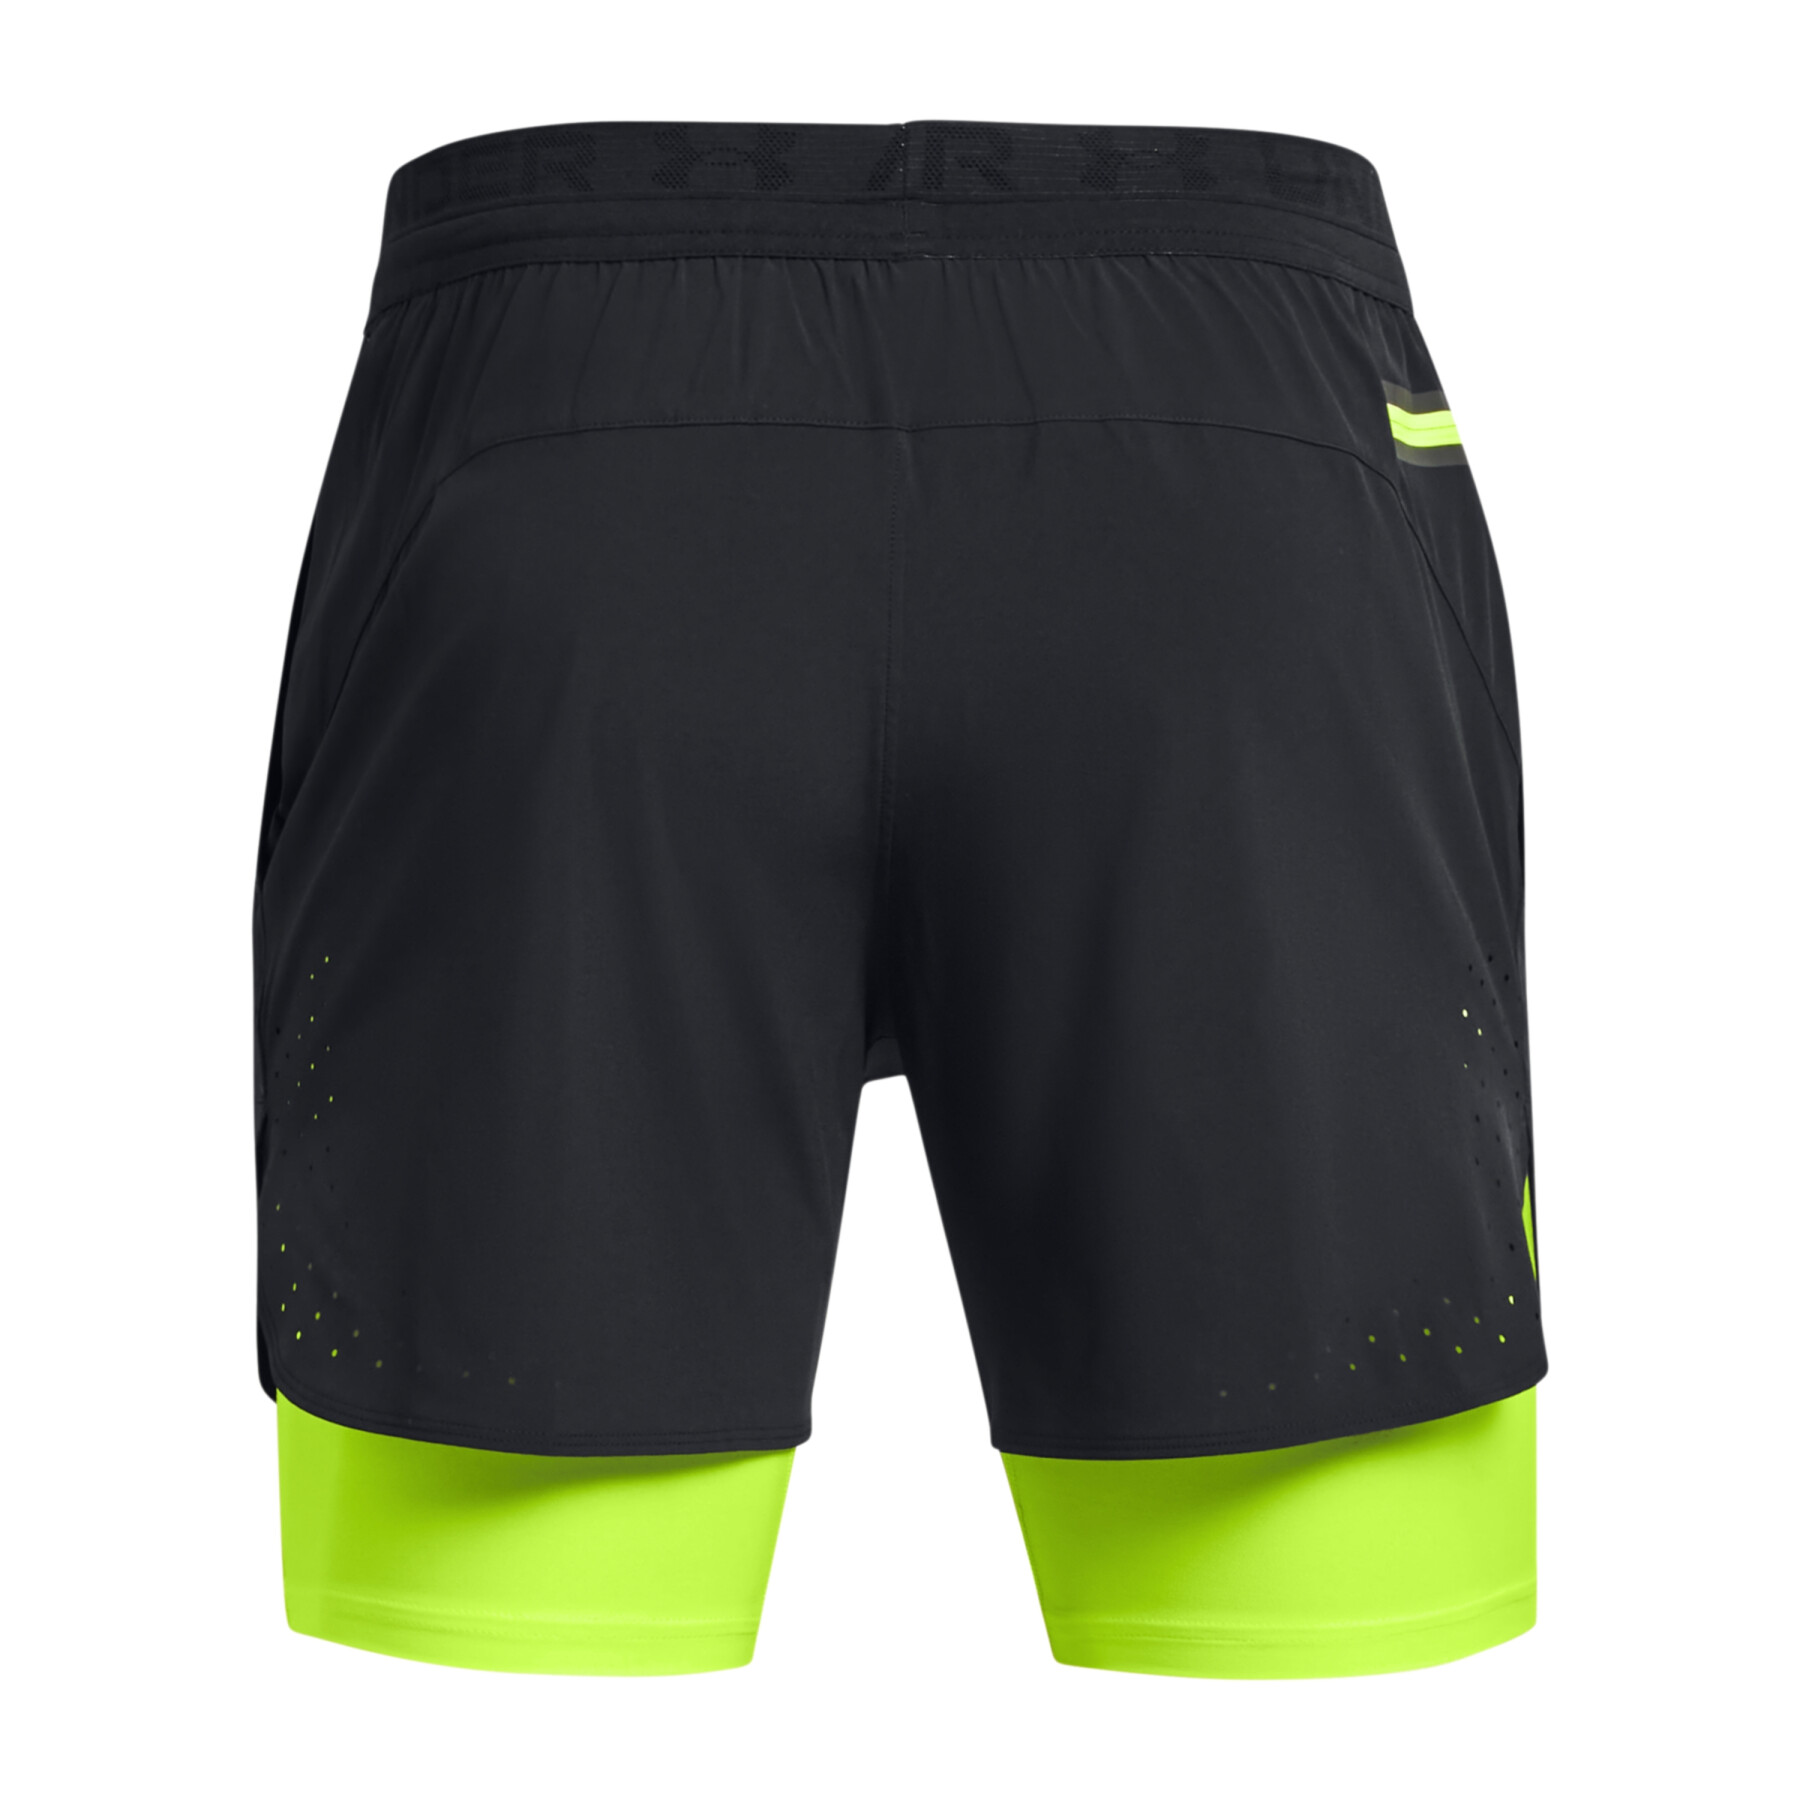 2 in 1 shorts Under Armour Peak Woven